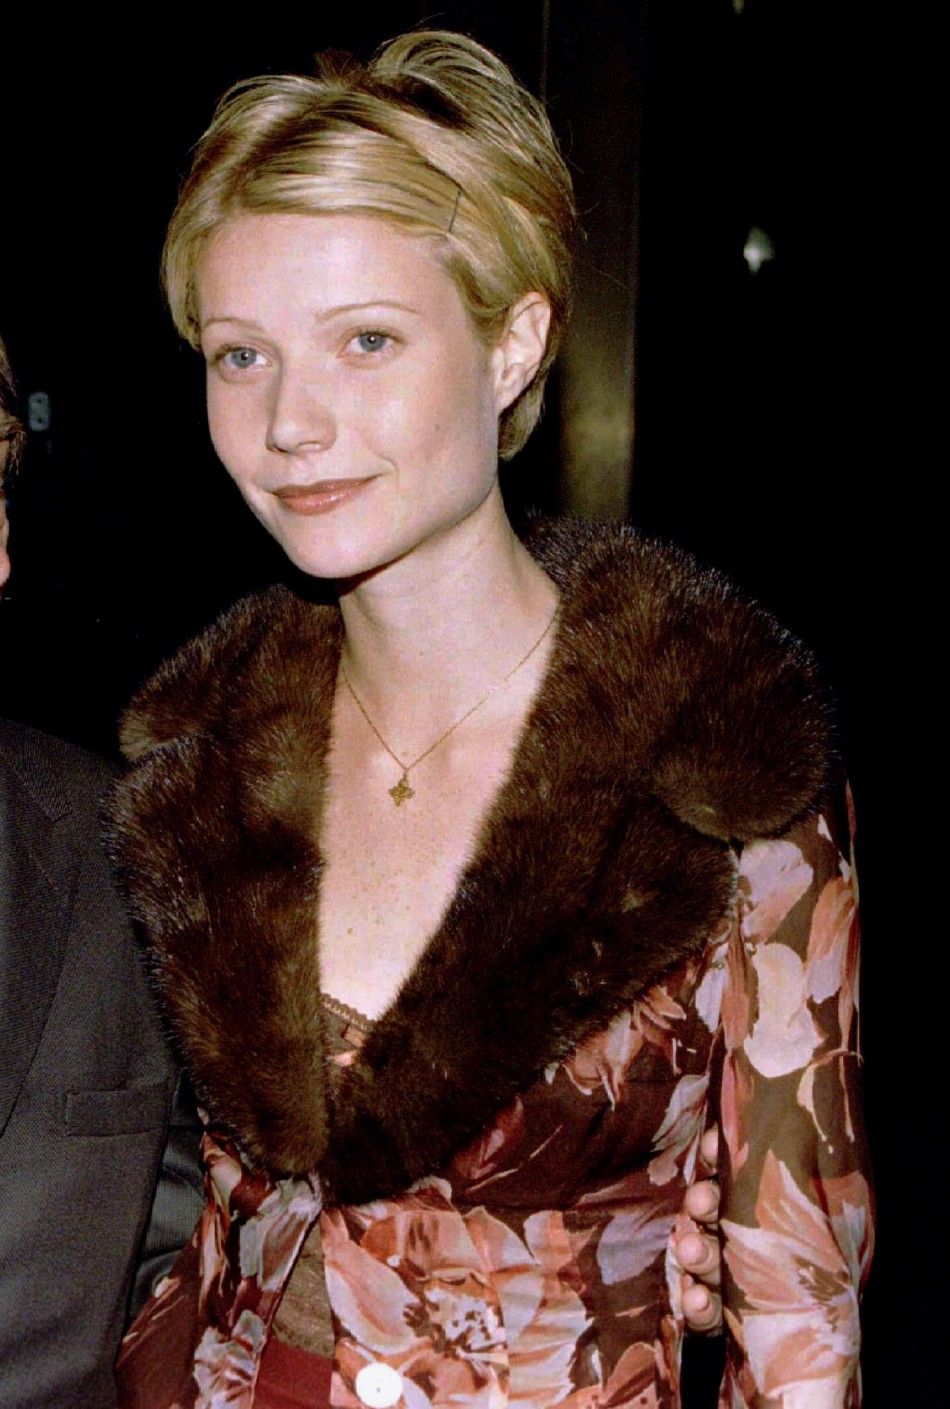 Gwyneth Paltrow, co-star of quotHard Eightquot the new film from WriterDirector Paul Thomas Anderson.